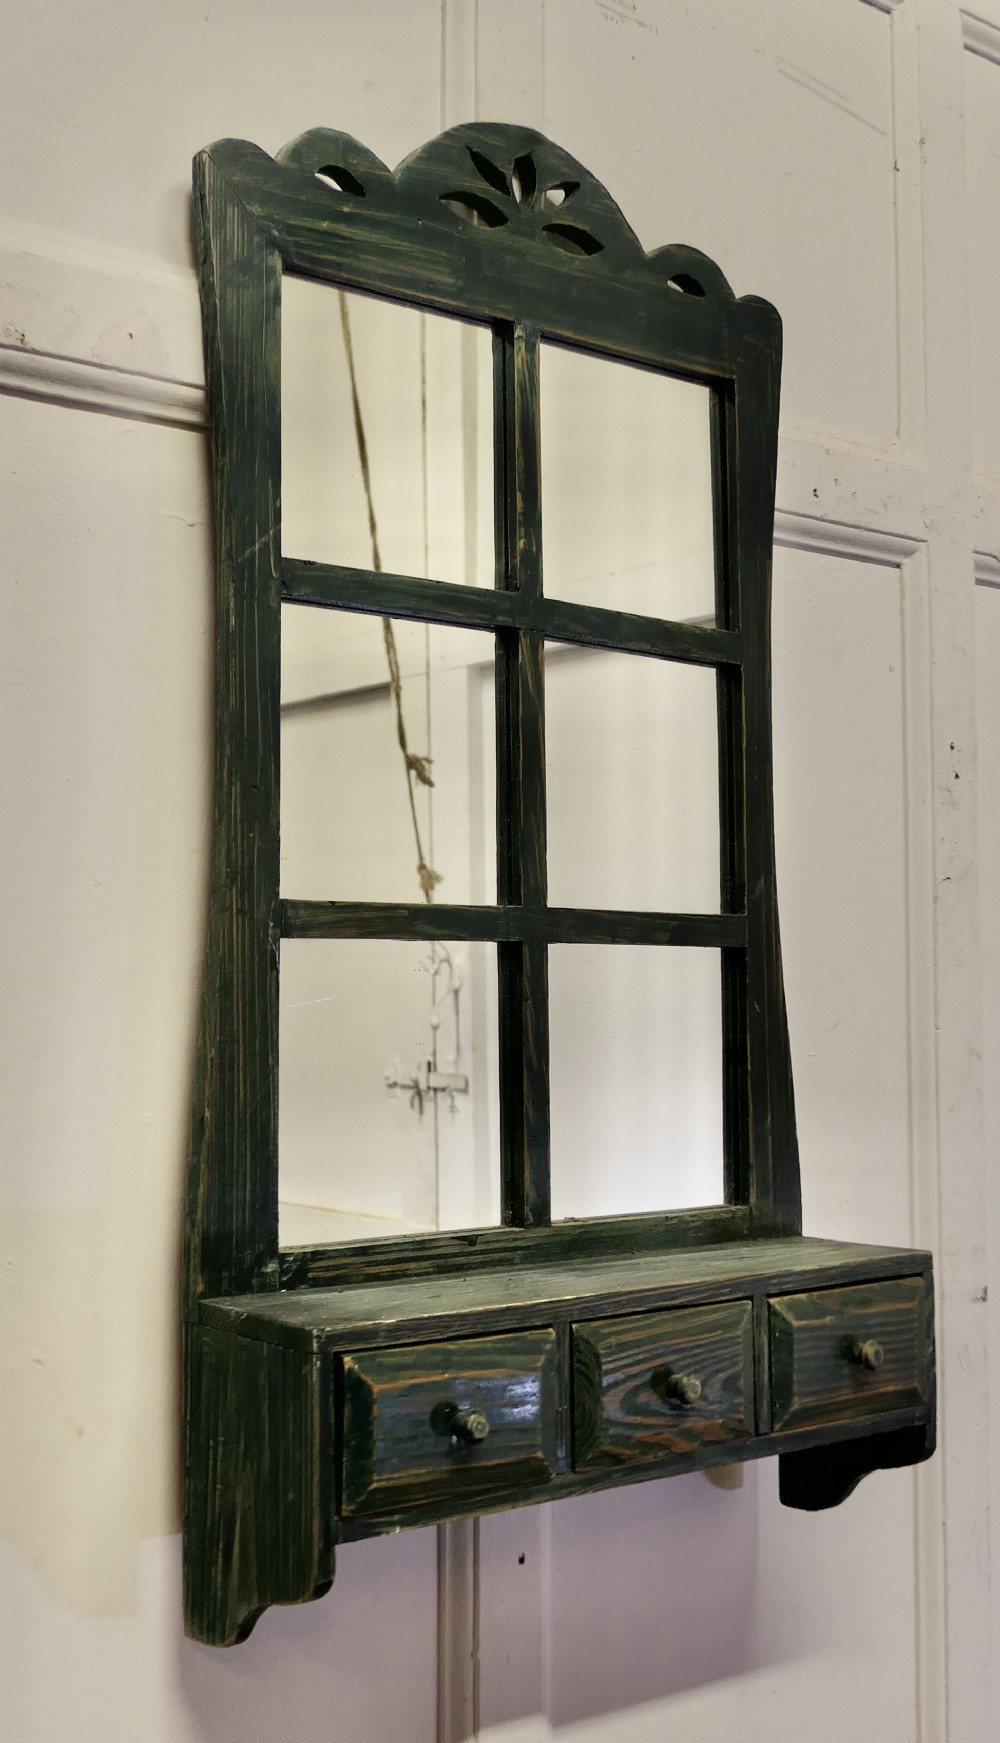 wall hanging window mirror with drawers cloakroom or bathroom